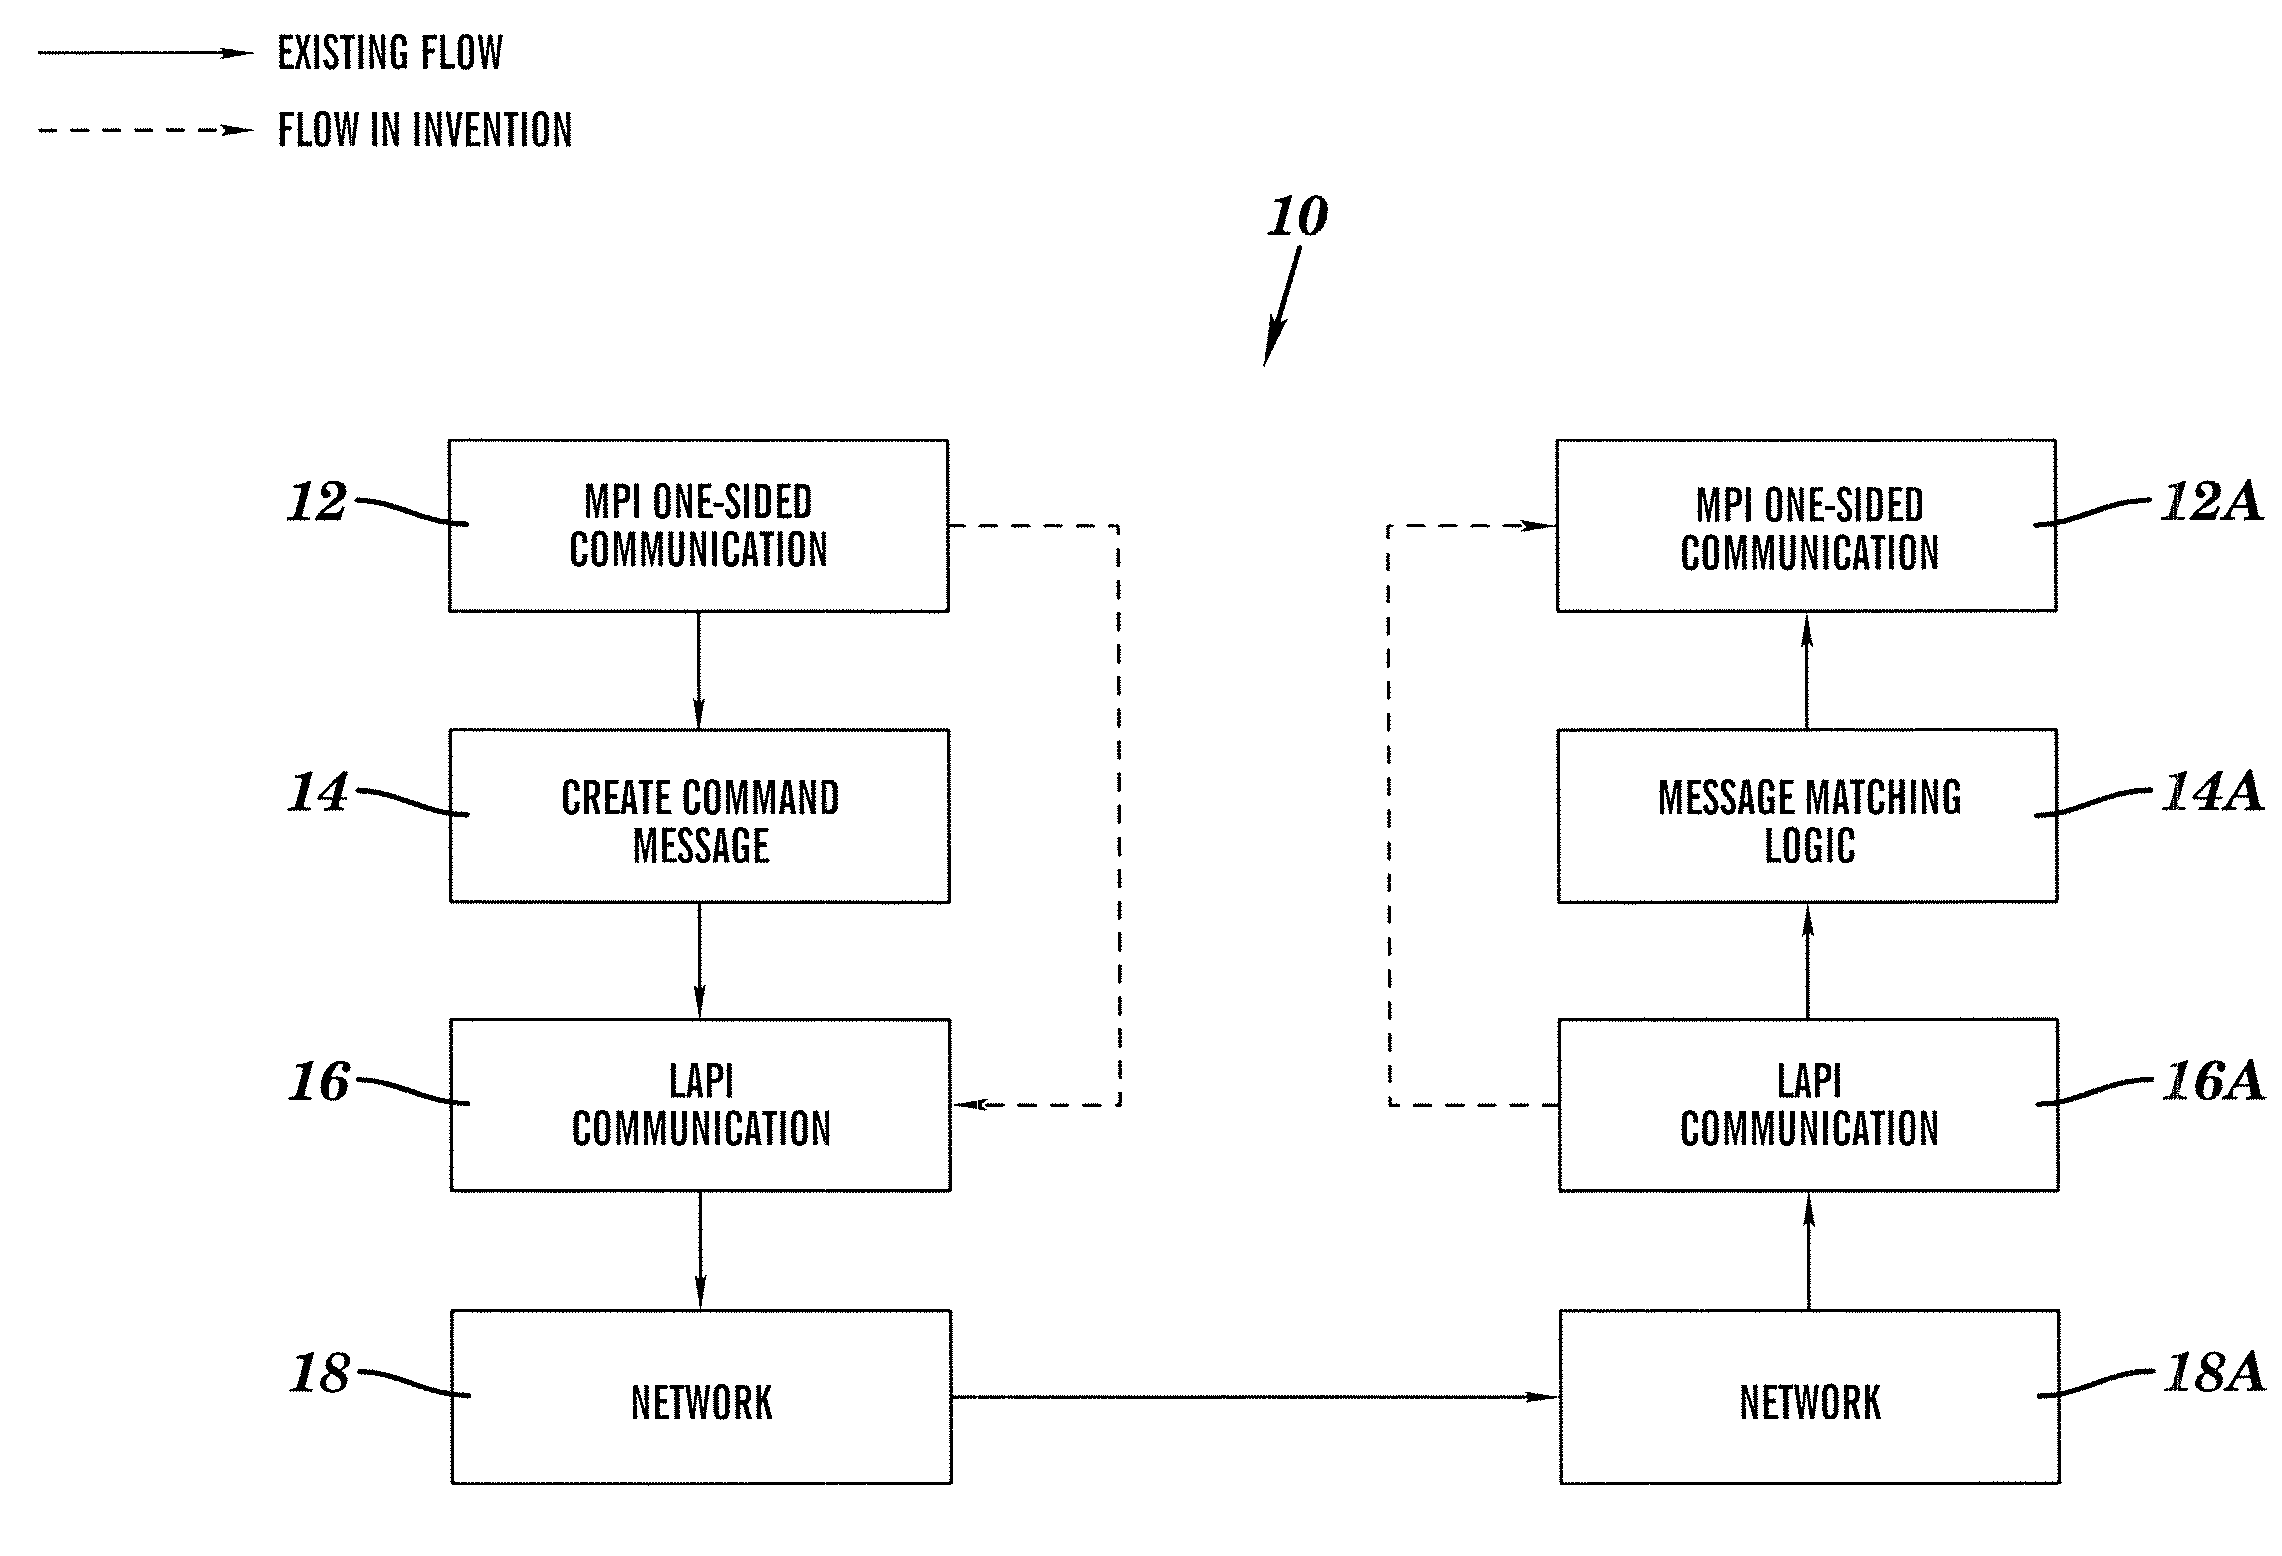 Method for implementing MPI-2 one sided communication